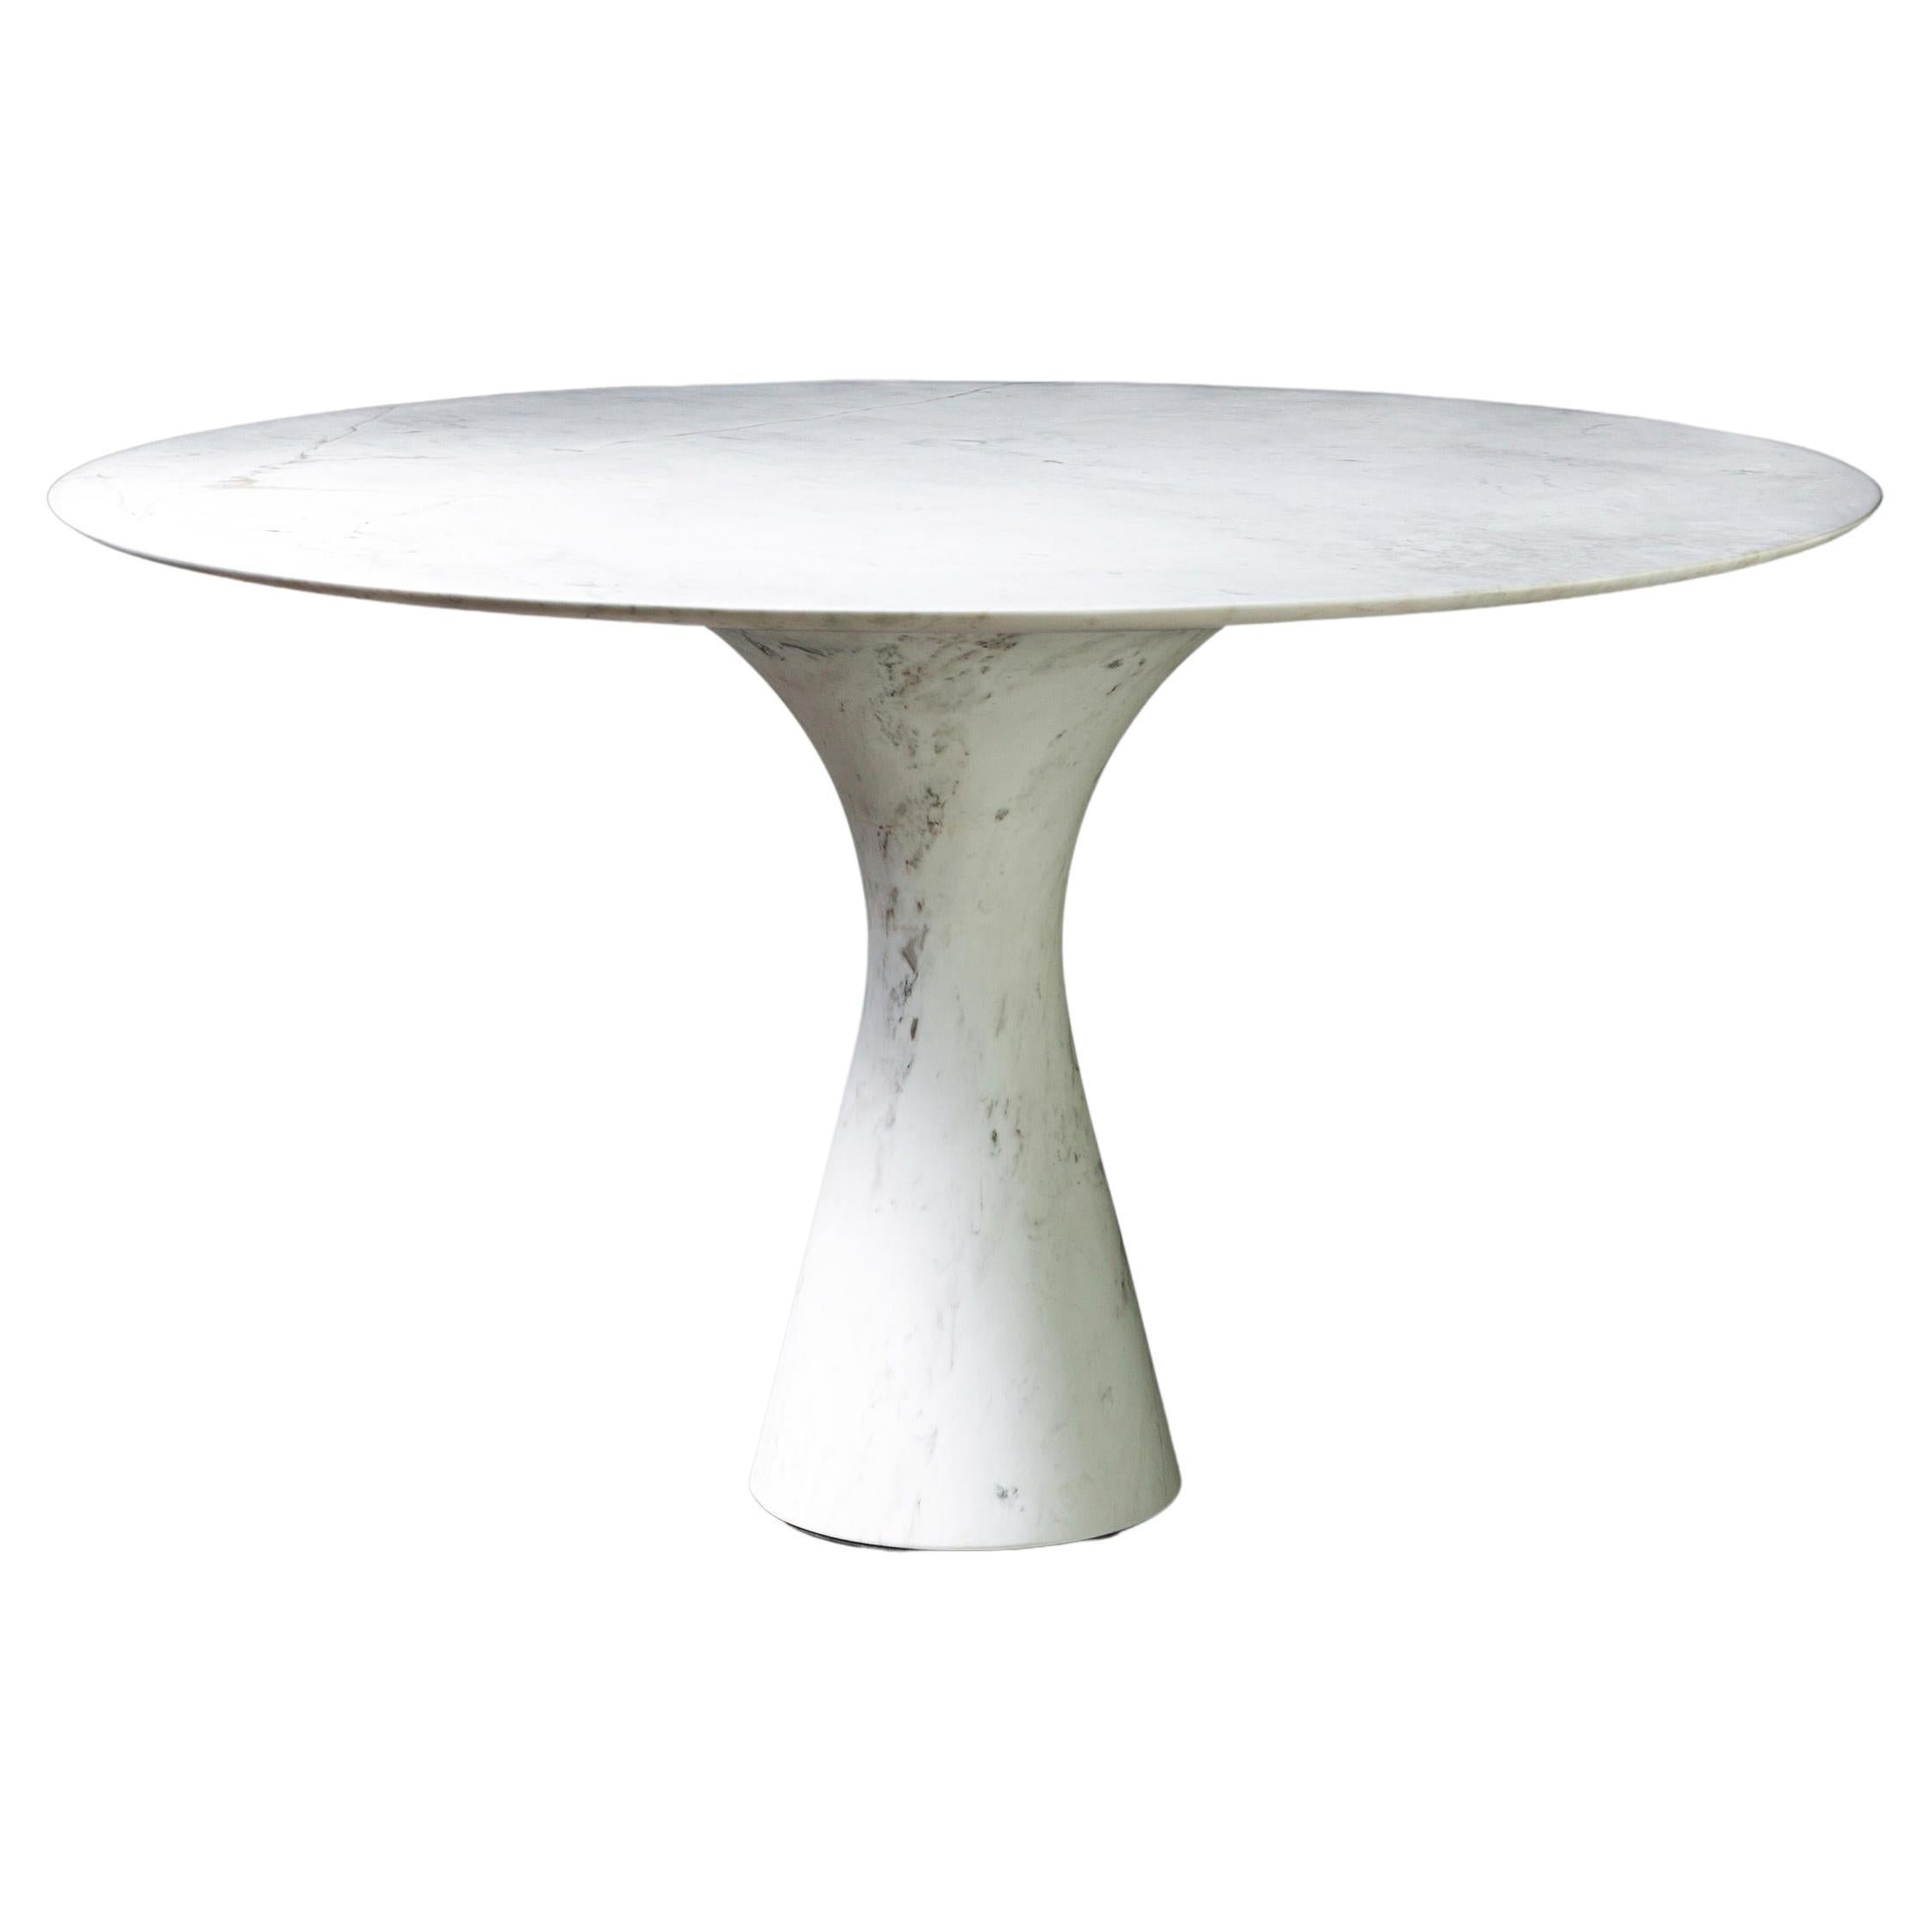 Kynos Refined Contemporary Marble Dining Table 130/75